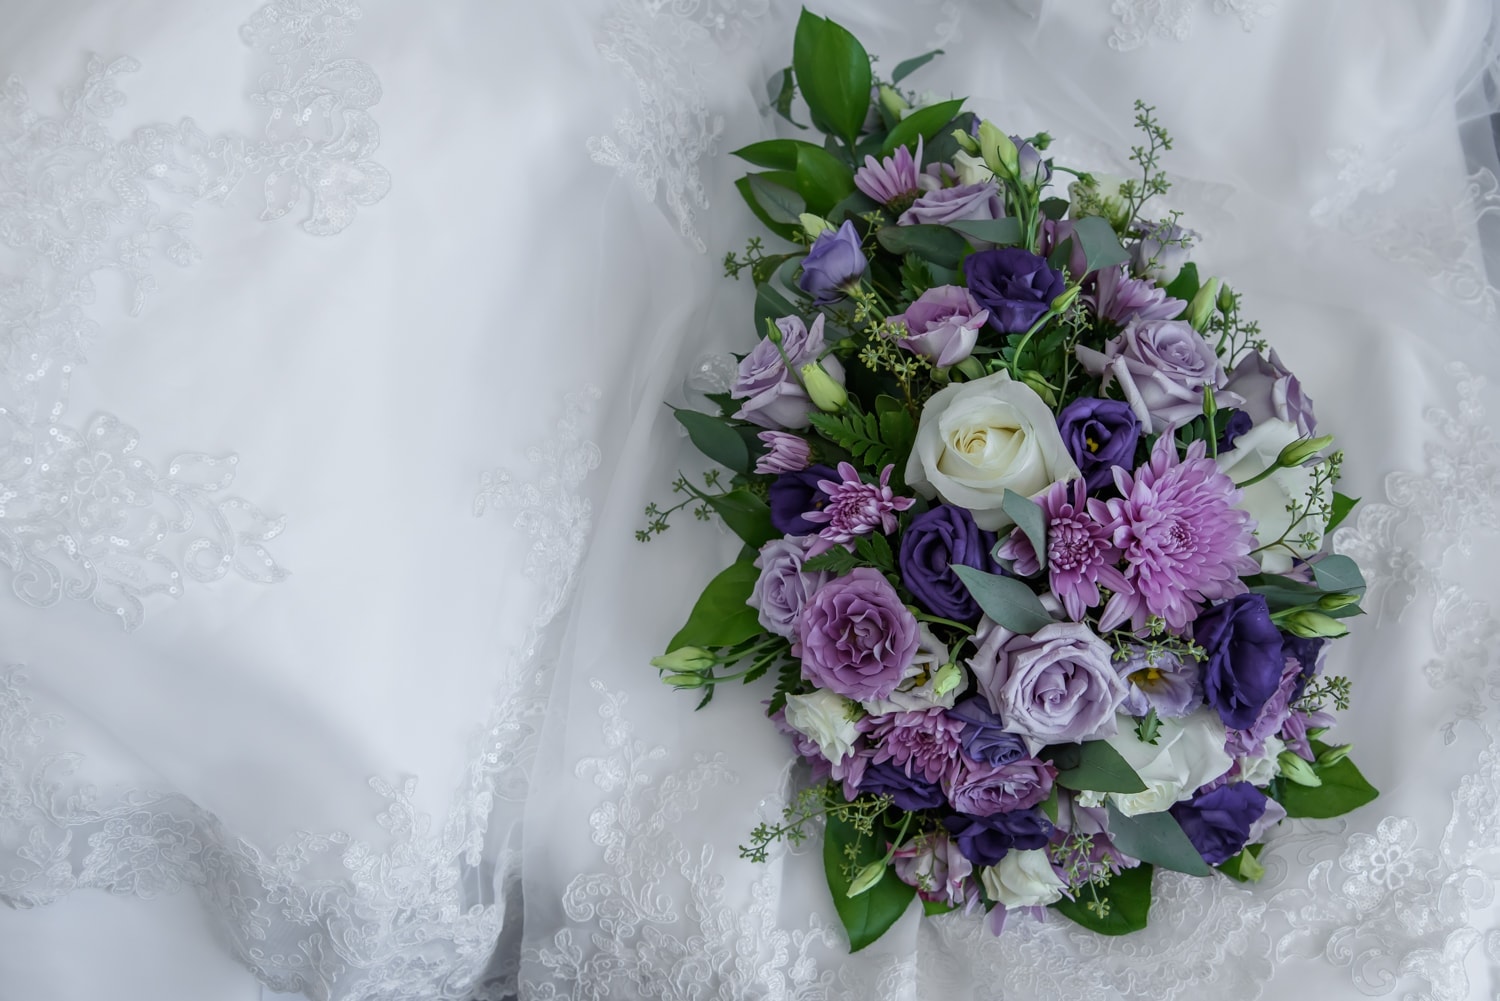 A real flower wedding bridal bouquet with ivory and purple flowers.